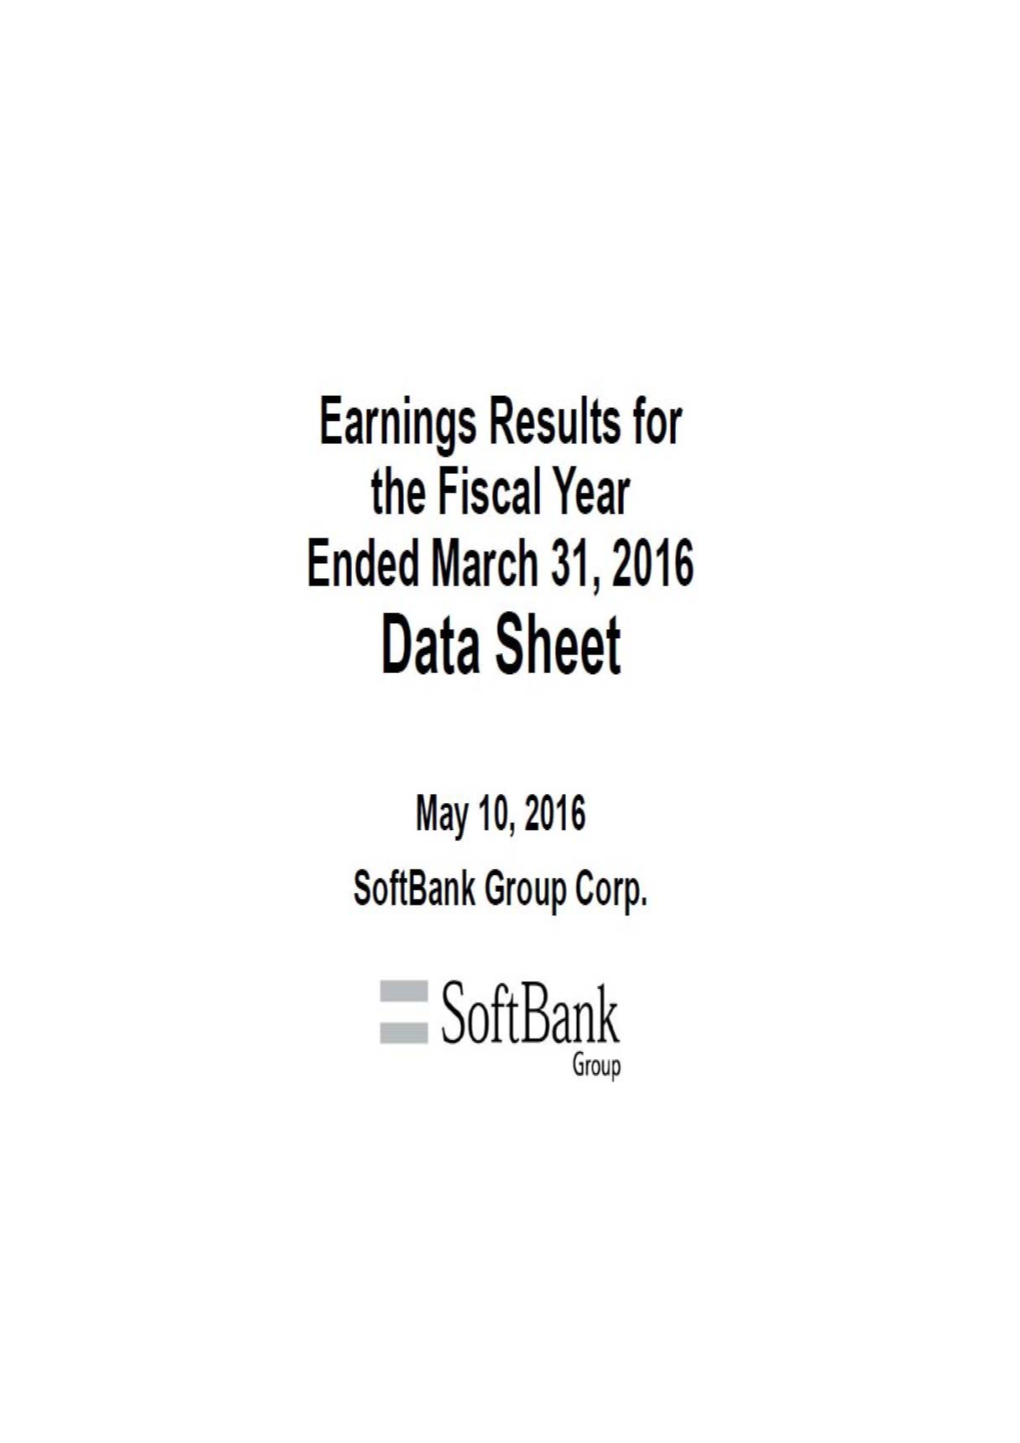 Earnings Results for the Fiscal Year Ended March 31, 2016 Data Sheet